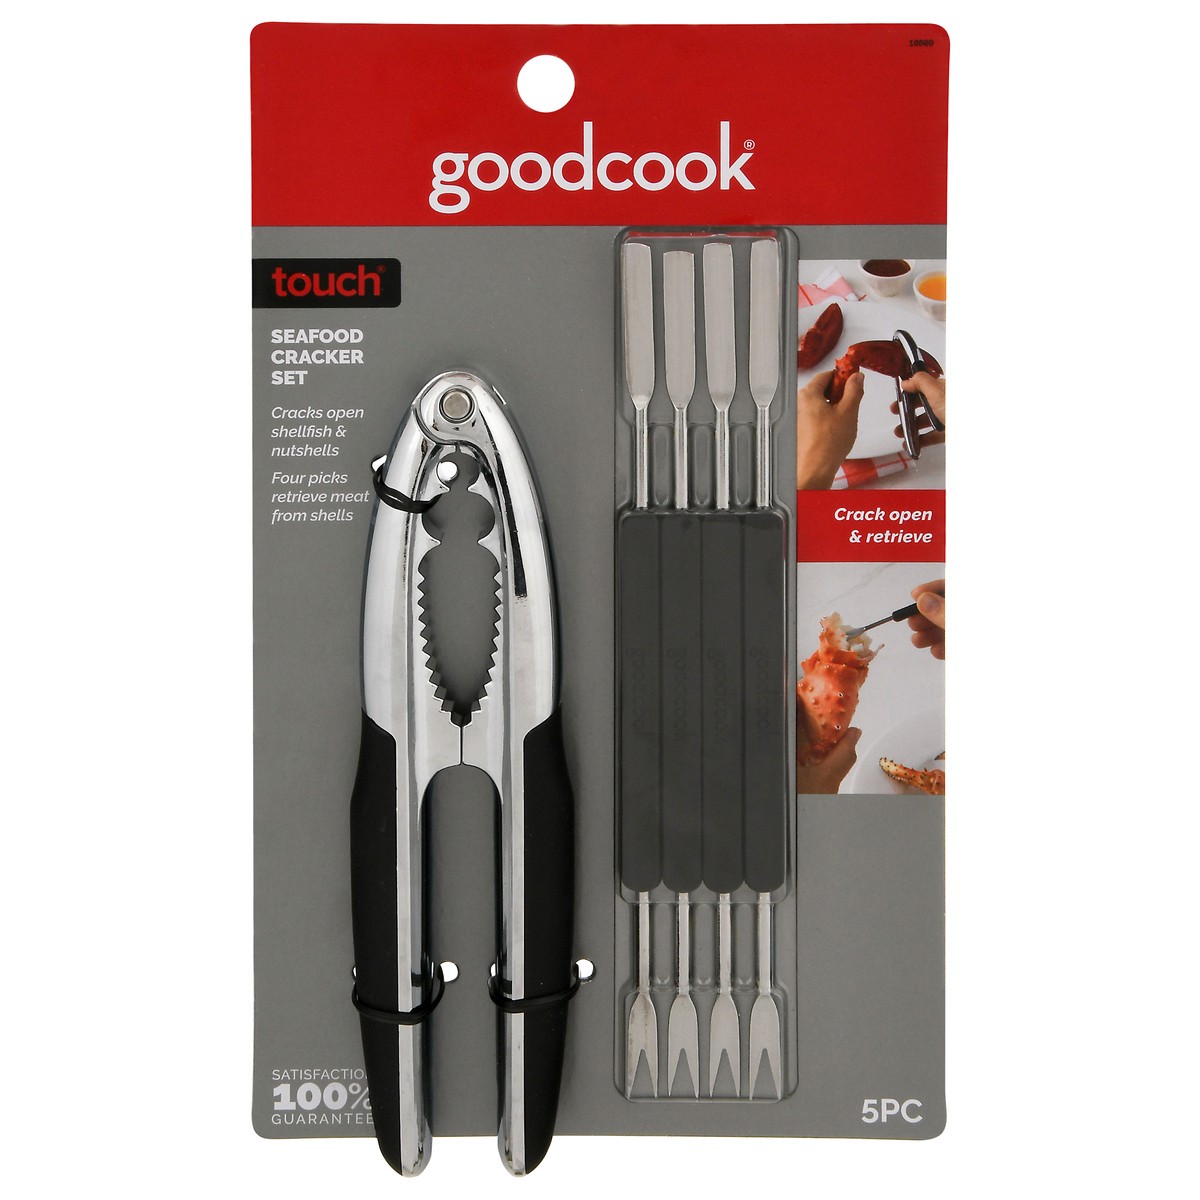 slide 1 of 9, Good Cook Touch Seafood Cracker Set, 5 ct